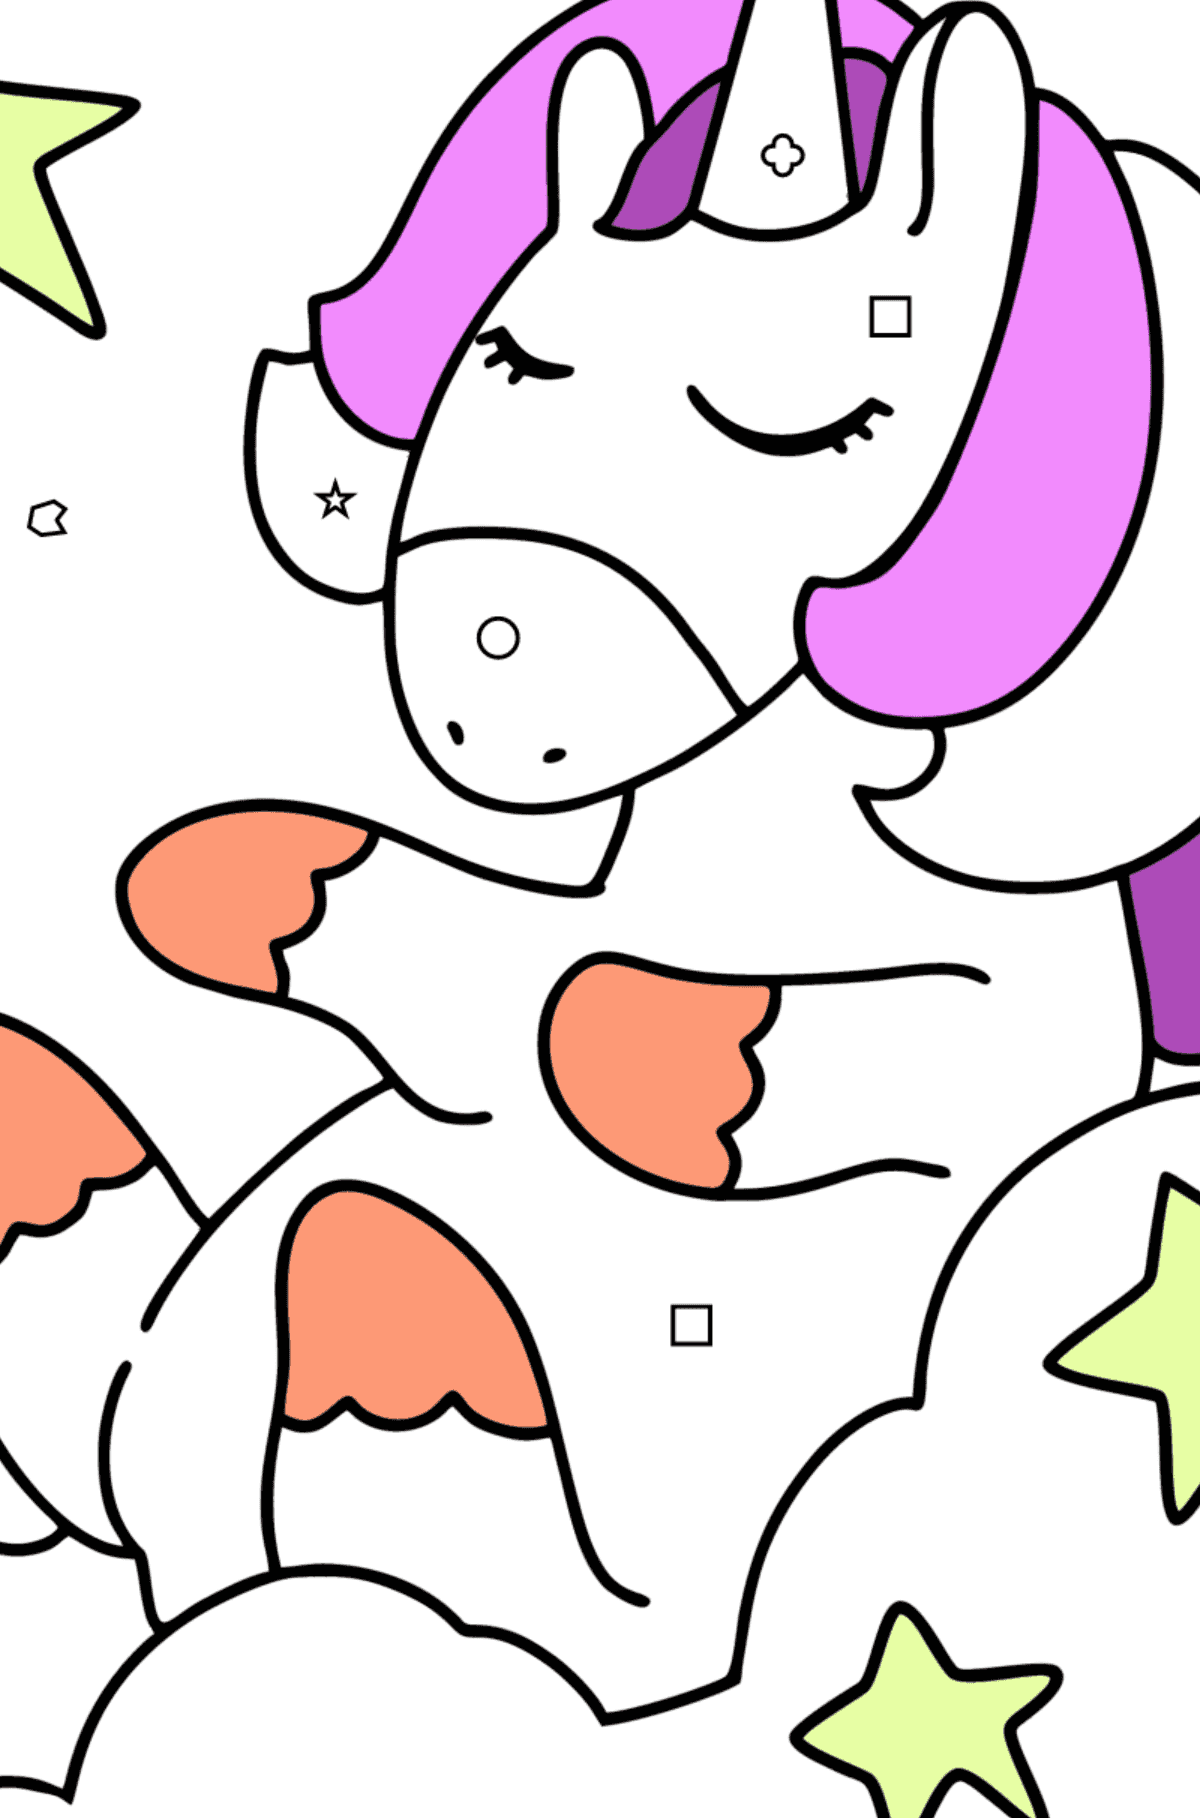 Funny unicorn coloring page - Coloring by Geometric Shapes for Kids